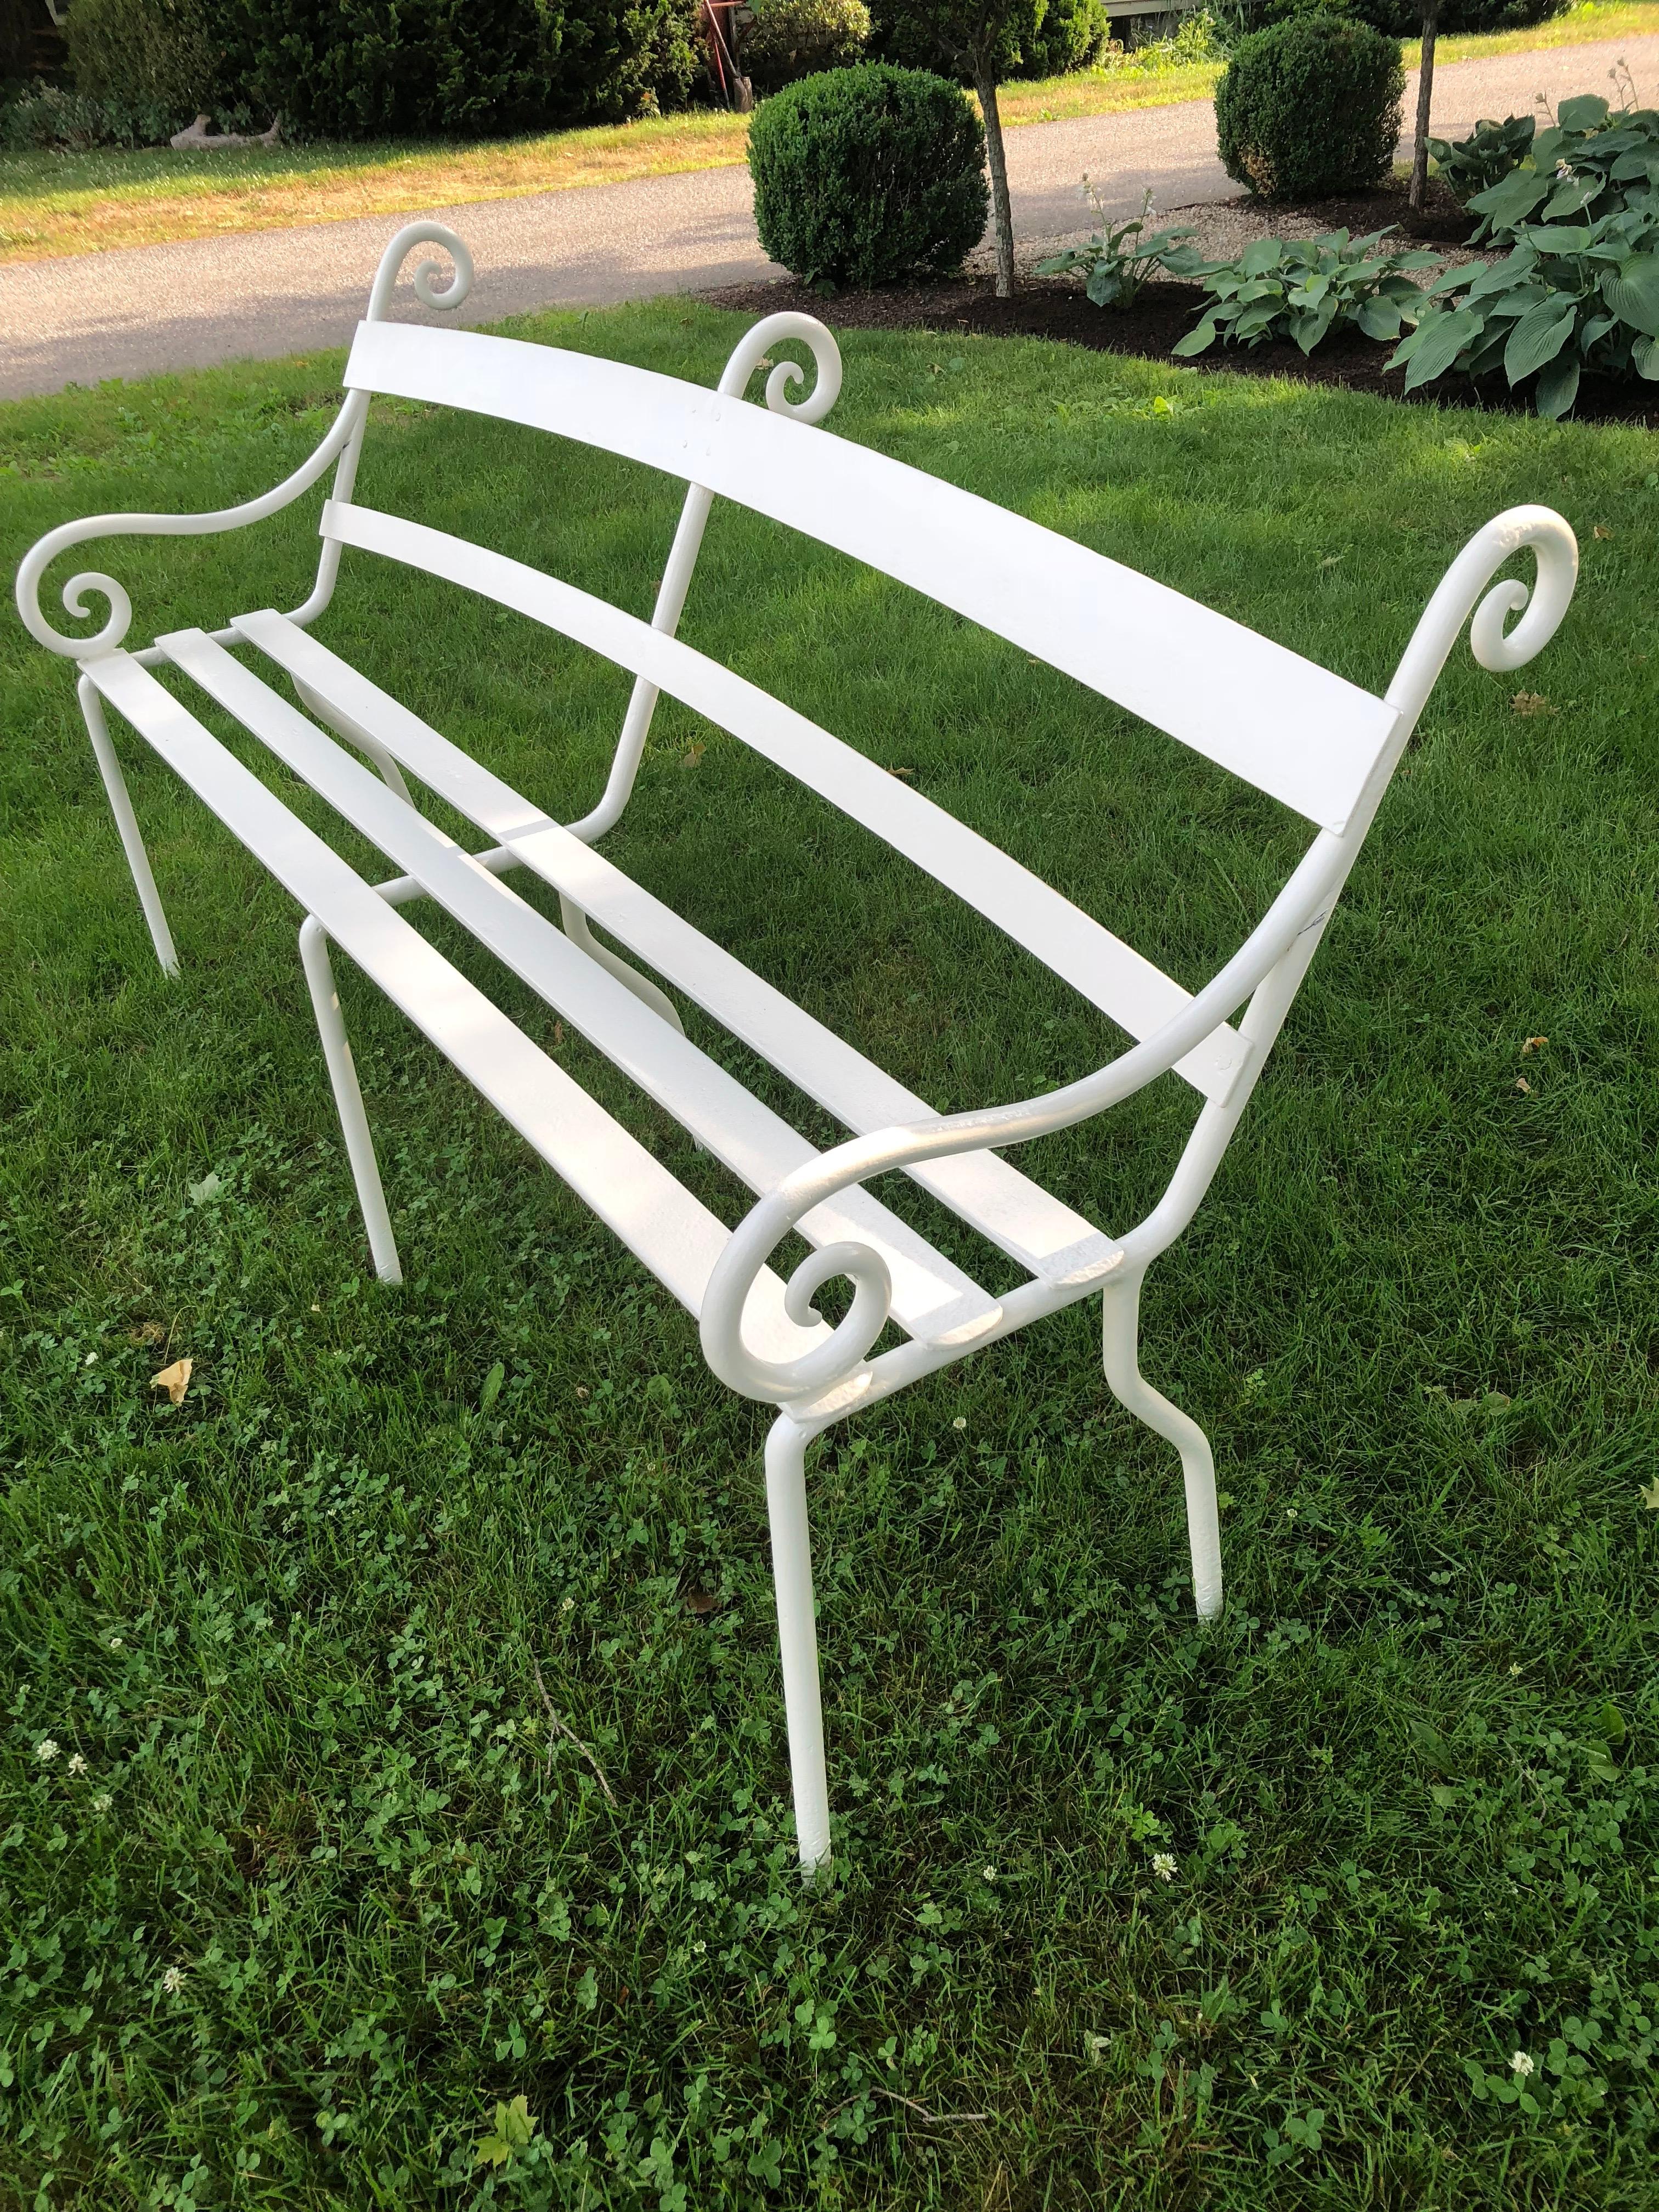 This rare and exceptional late Regency bench is both elegant and unusual in form. It is constructed of very heavy hand-forged wrought iron with a canted back that makes for very comfortable seating. The bold scrolled ears and arm supports make this